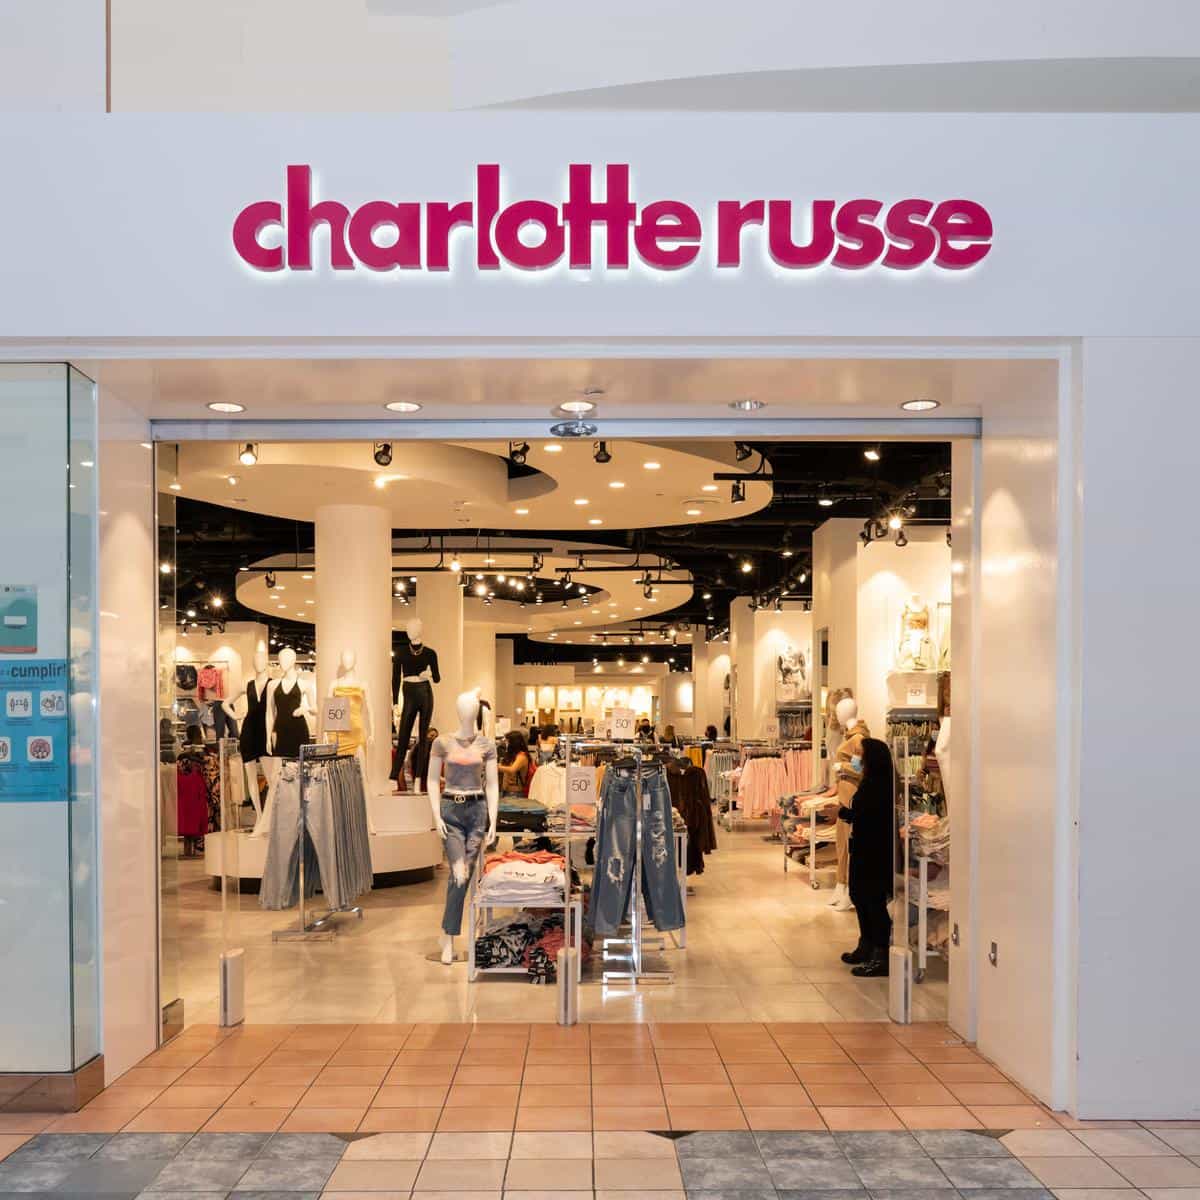 charlotte russe storefront within a mall